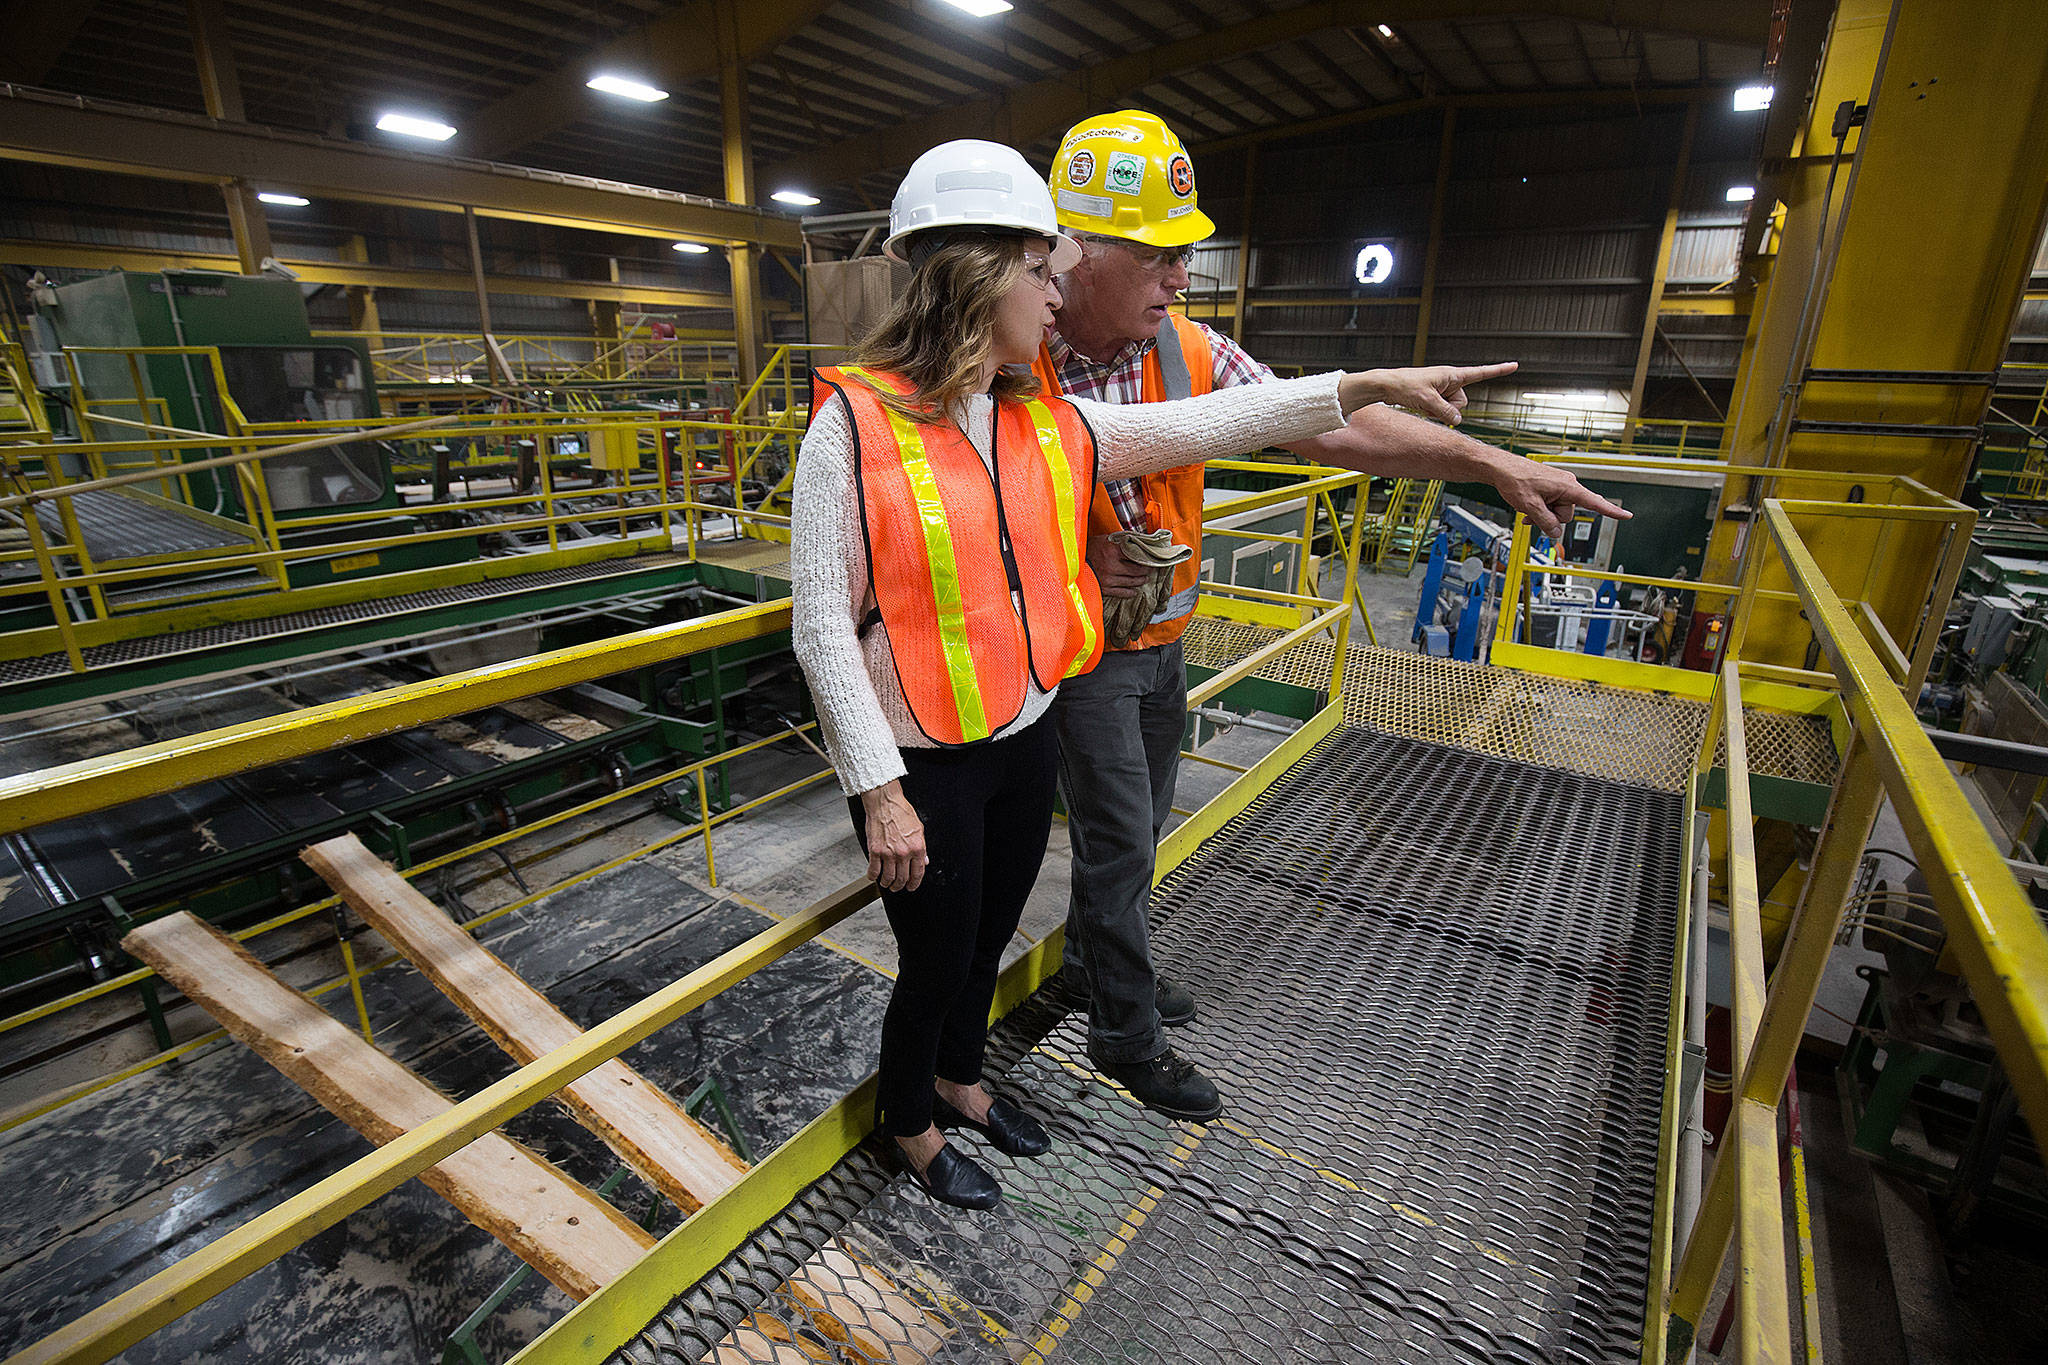 Commissioner of Public Lands Hilary Franz and Hampton Mill manager Tim Johnson talk over the noise of the mill during a tour on Thursday, Aug. 29, 2019 in Darrington, Wash. (Andy Bronson / The Herald)